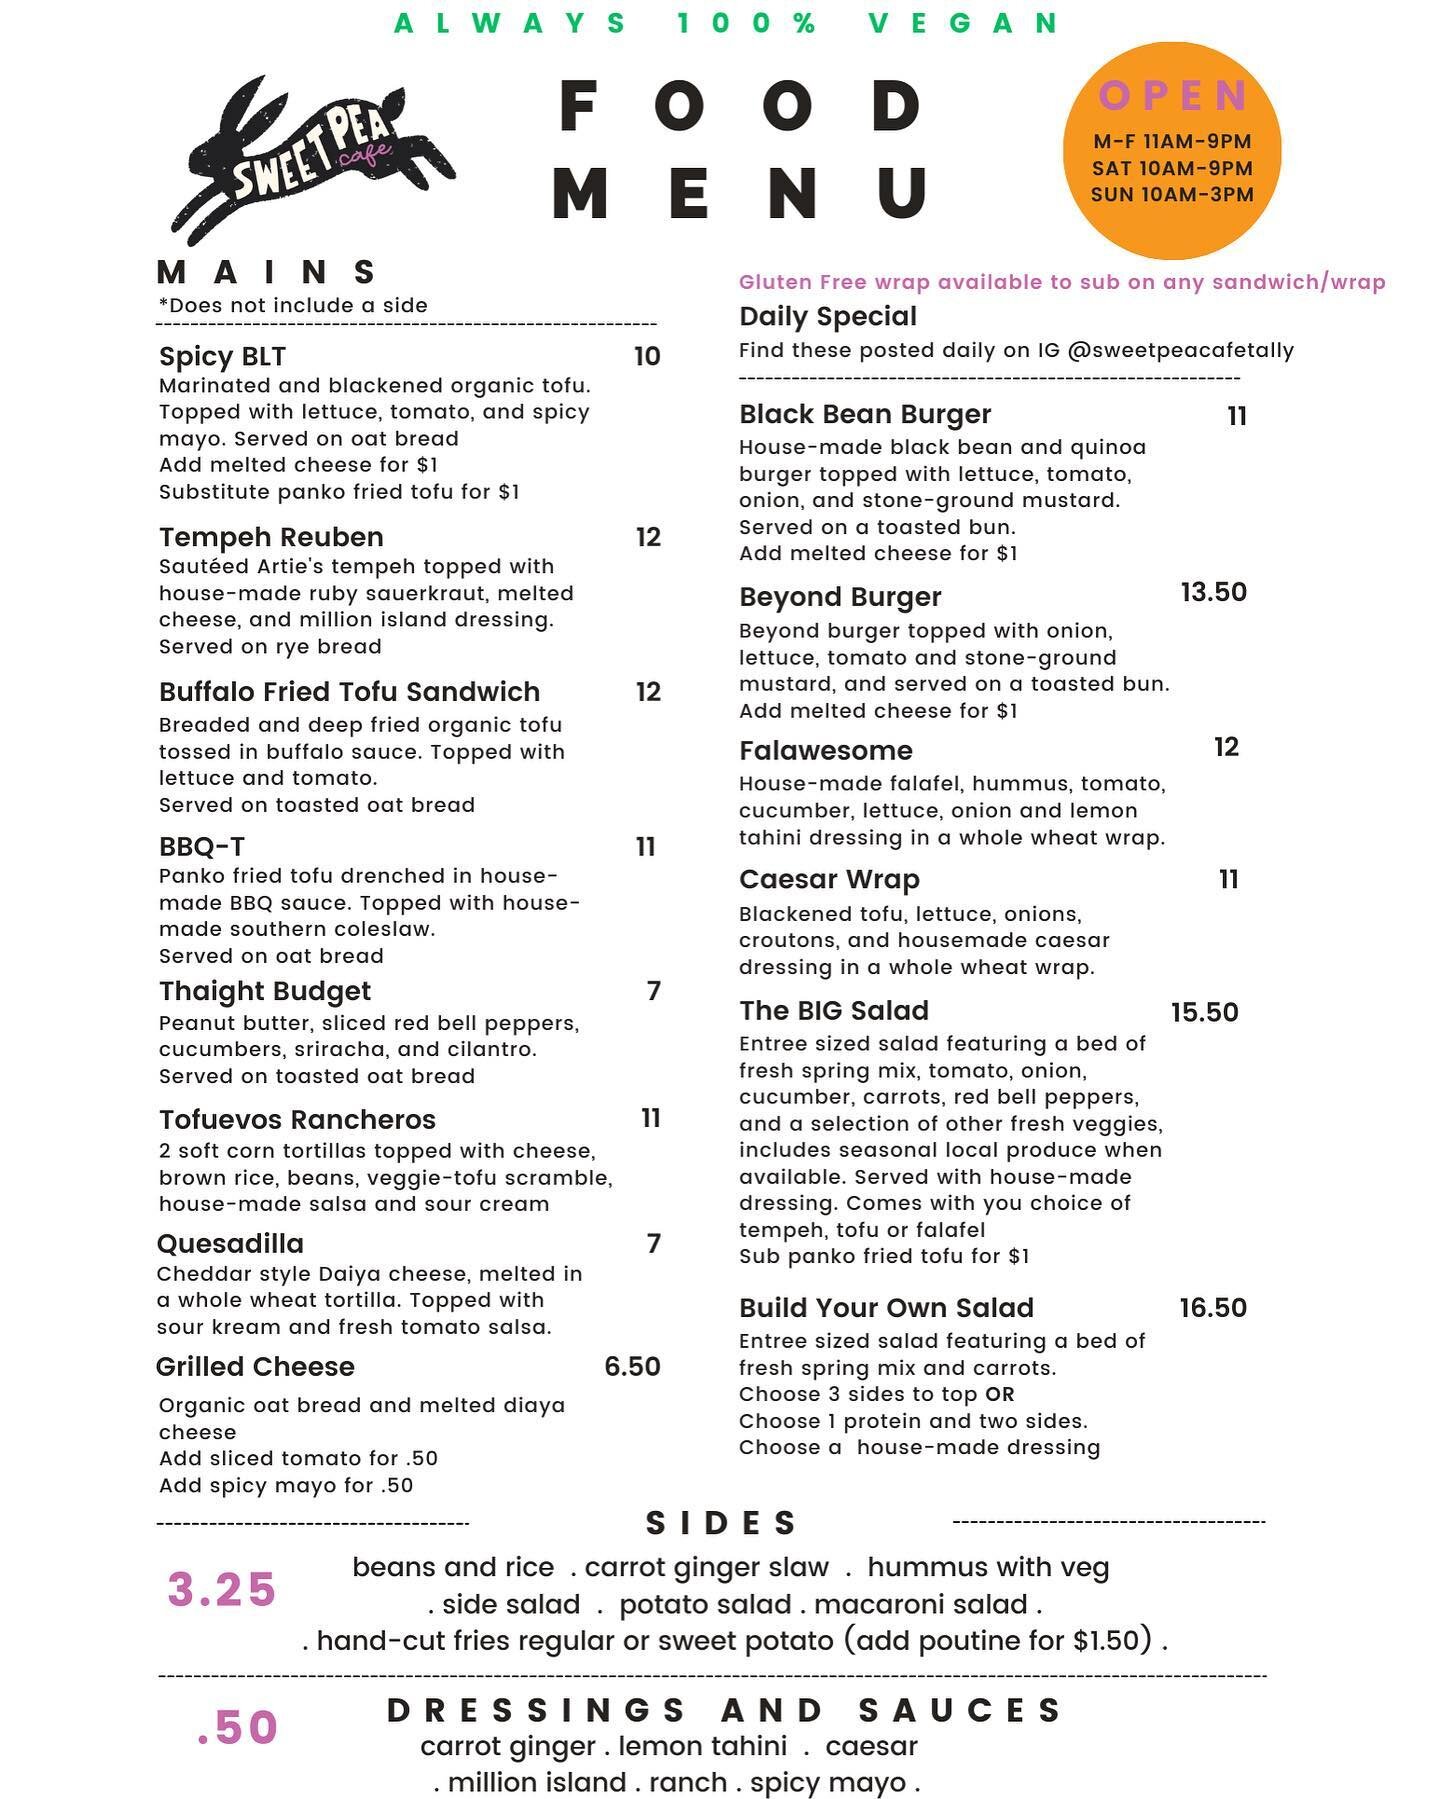 ✨New Menu✨

Reposting our new menu with a few typos corrected 😄 plus, adding the info about substituting a gluten free wrap on any sandwich or wrap!

As always, we look forward to seeing you and serving you delicious, fresh, made from scratch vegan 